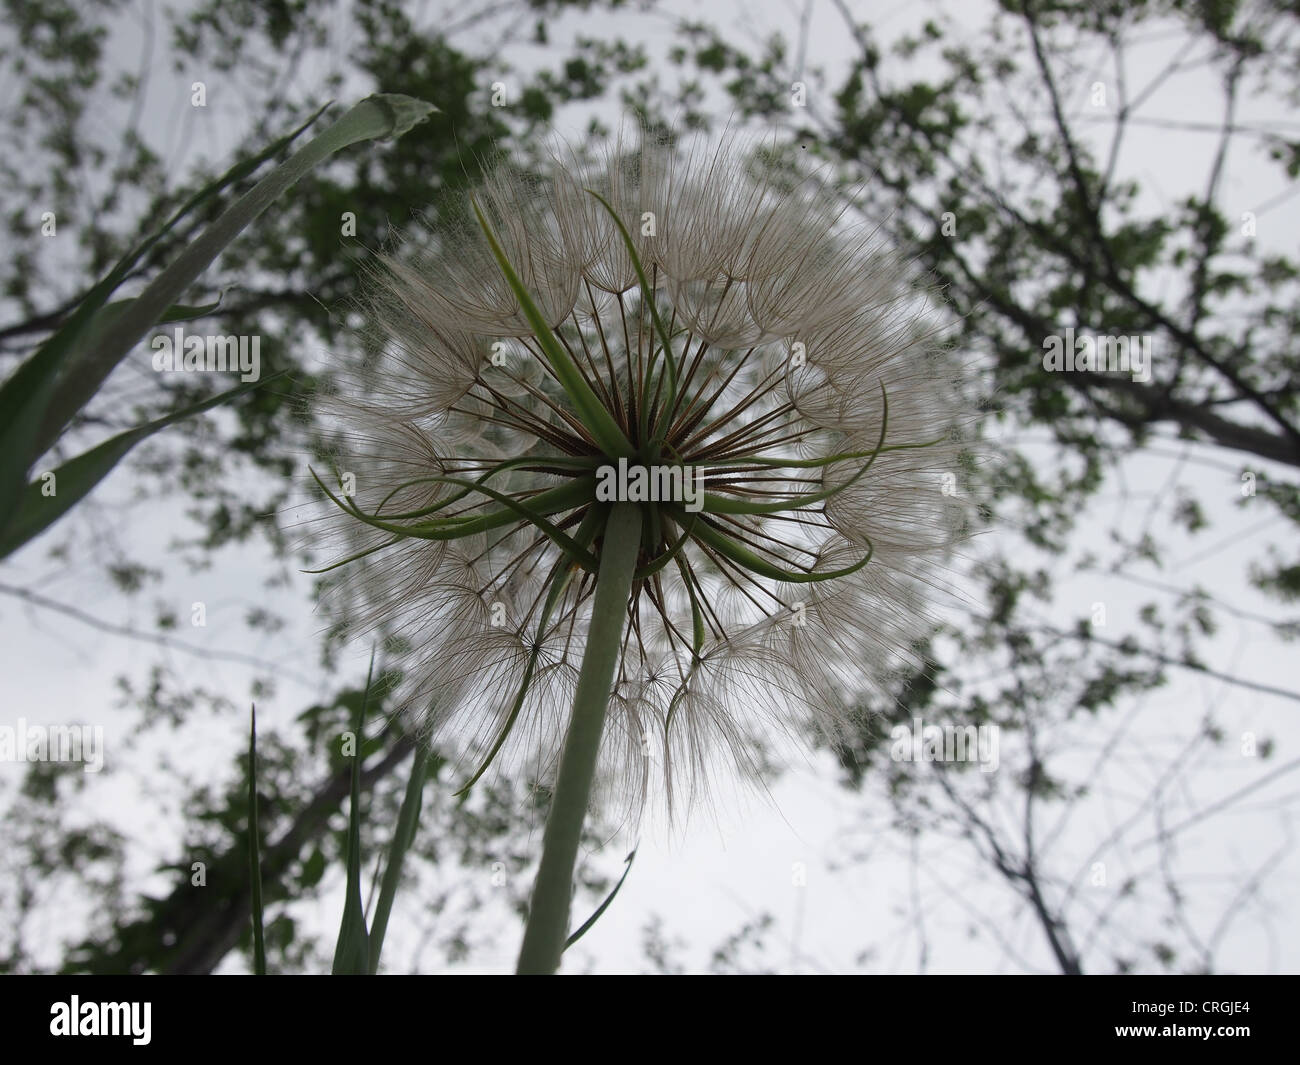 Seed head from underneath, blurred background Stock Photo